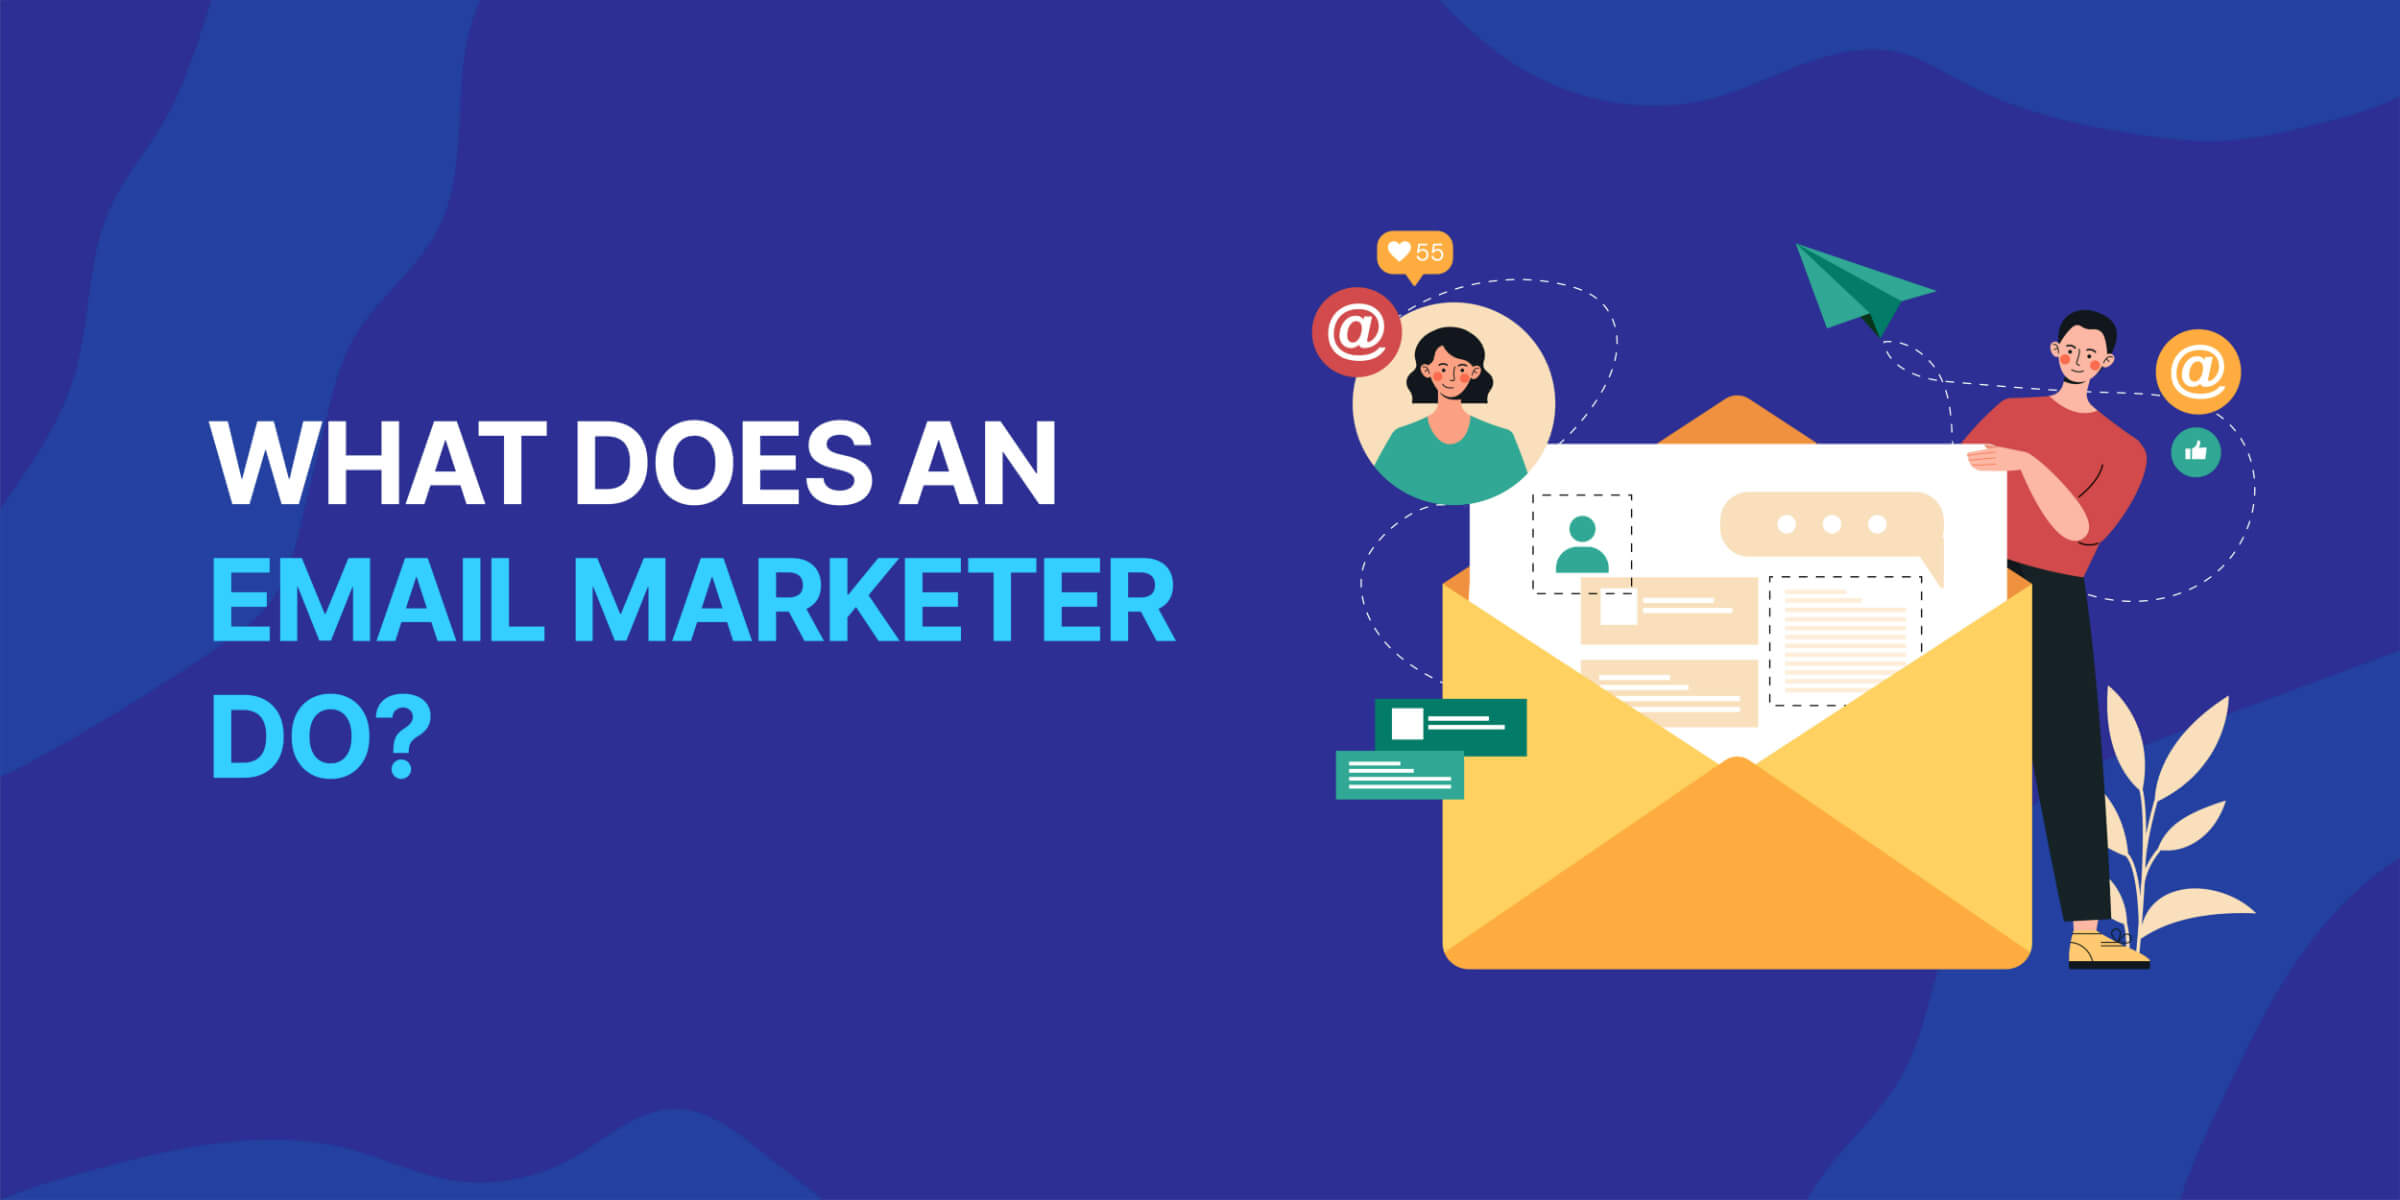 What Does an Email Marketer Do